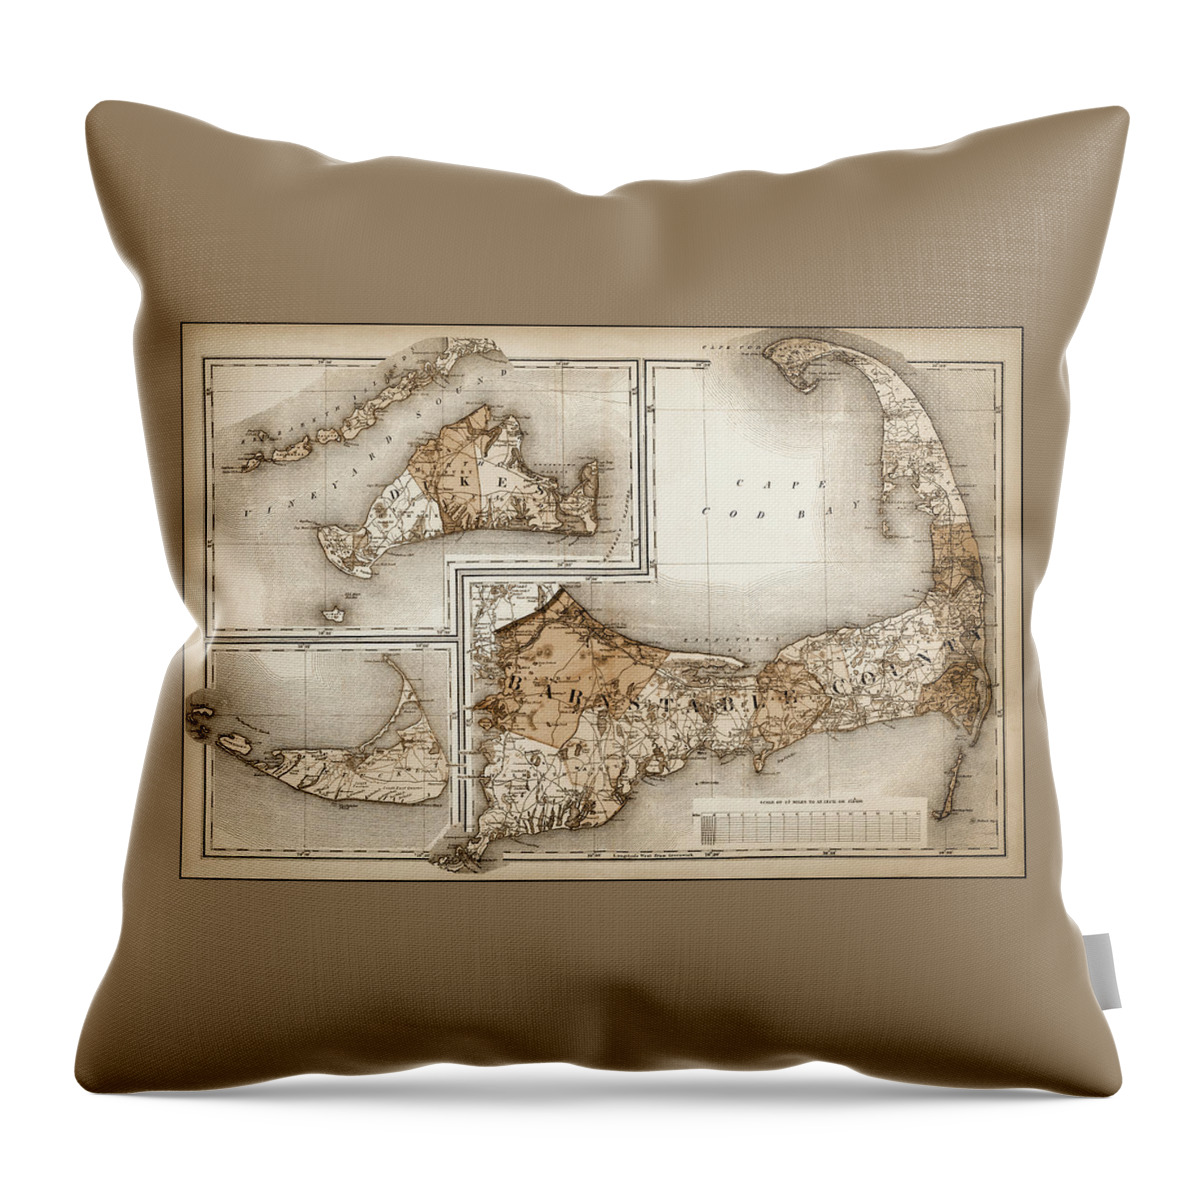 Cape Cod Throw Pillow featuring the photograph Cape Cod Antique Historical Map 1871 Sepia by Carol Japp